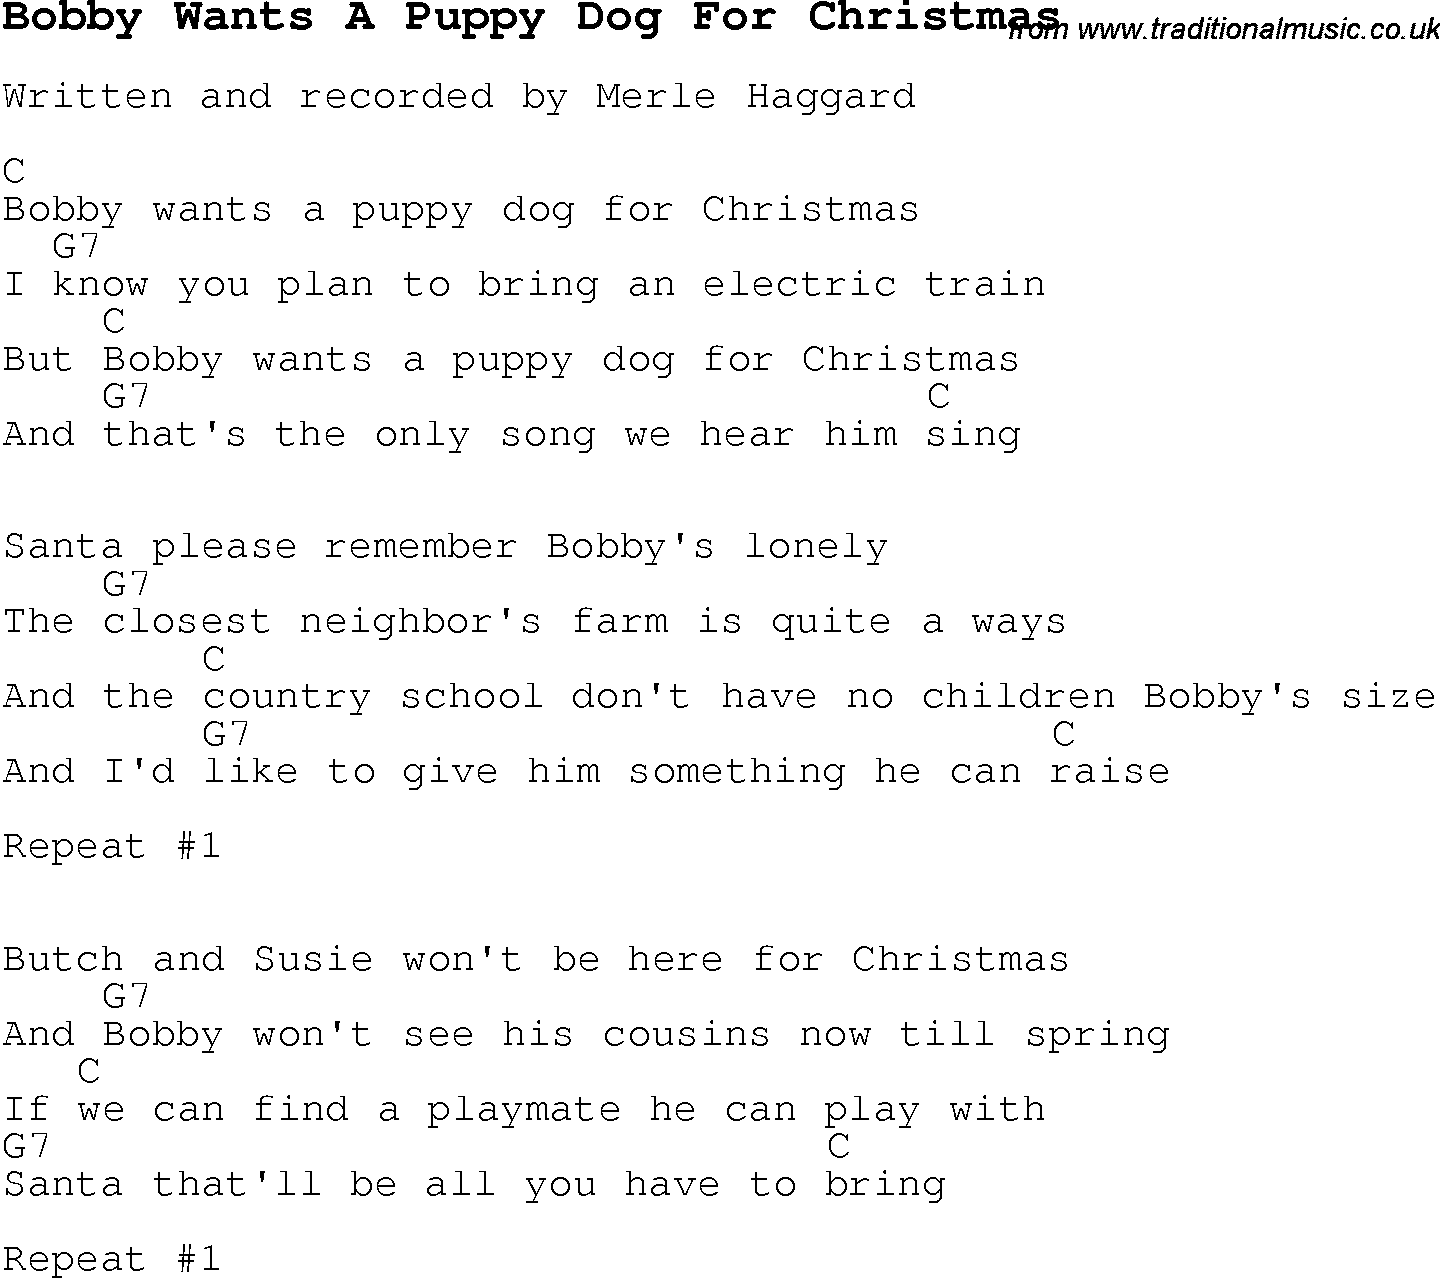 Christmas Songs and Carols, lyrics with chords for guitar banjo for Bobby Wants A Puppy Dog For Christmas